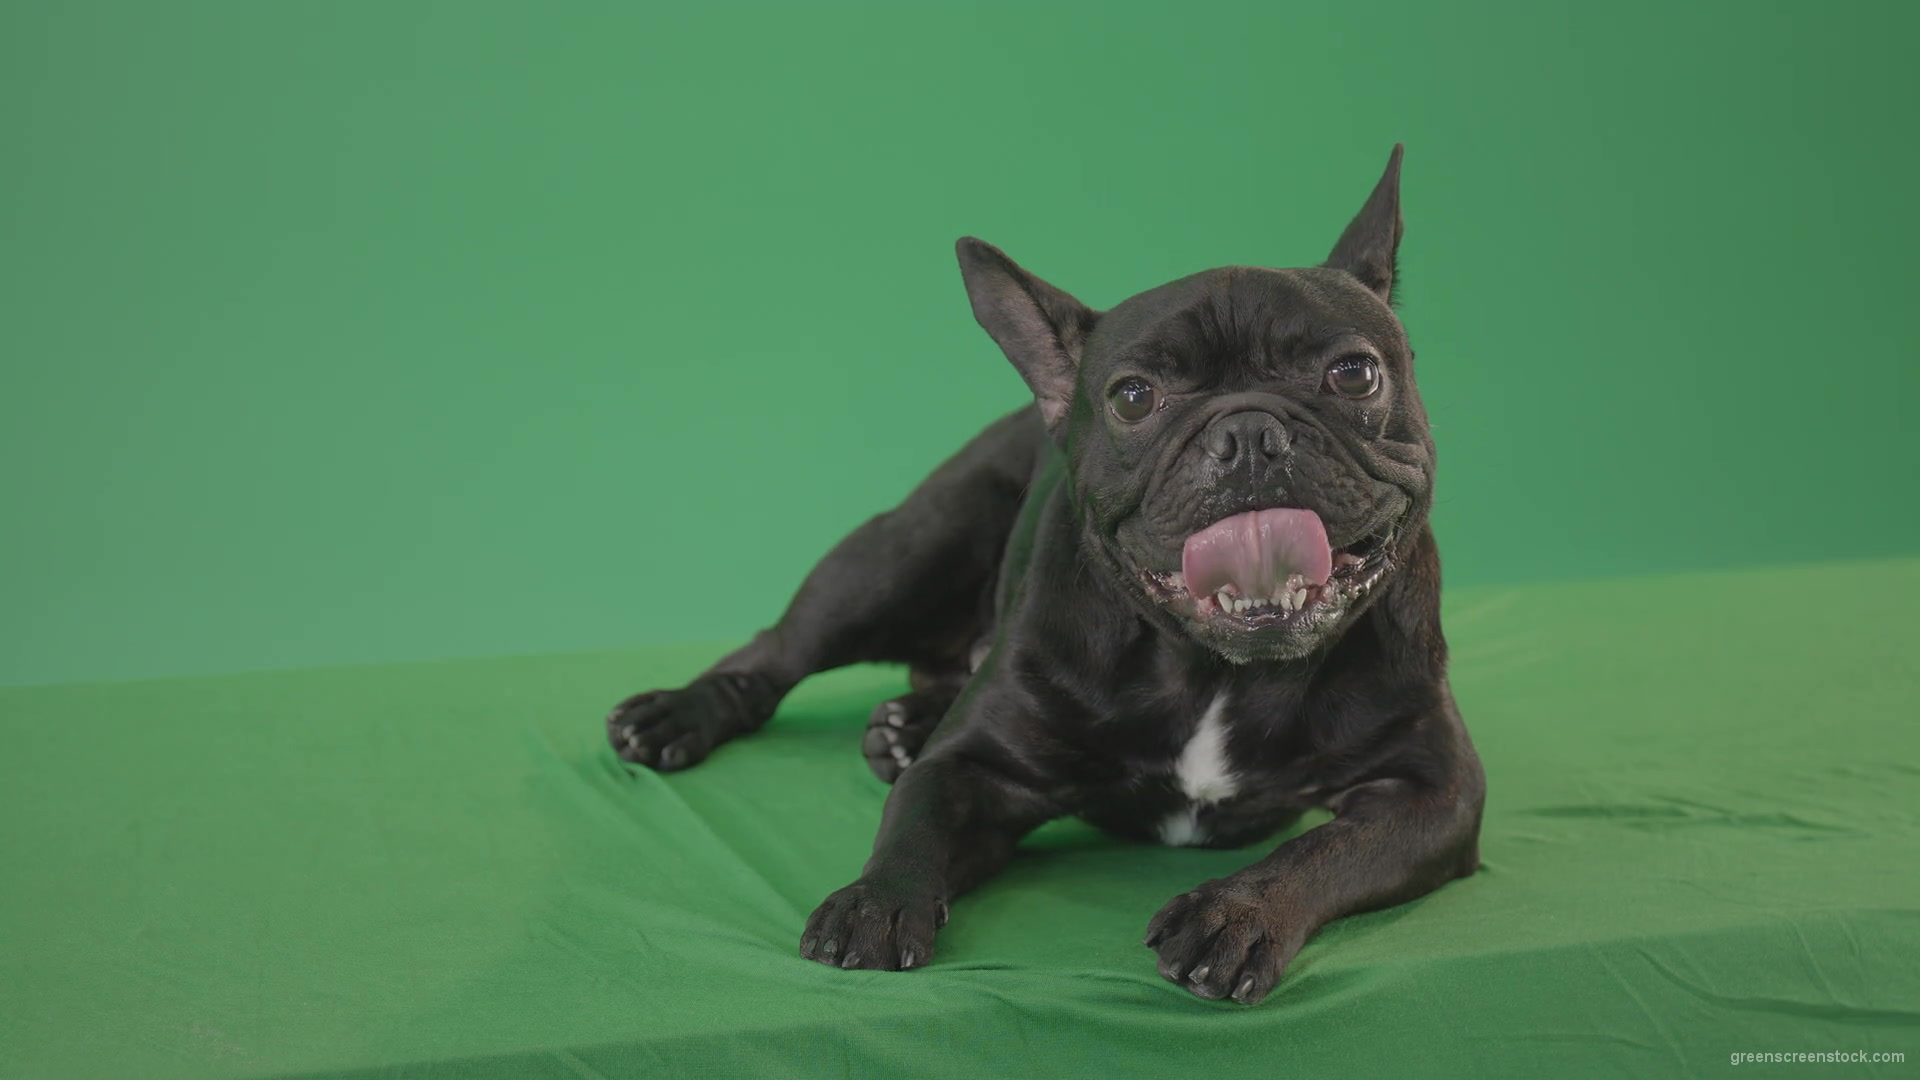 Boring-black-French-Bulldog-chilling-like-a-Bos-on-green-screen-4K-Video-Footage-1920_007 Green Screen Stock